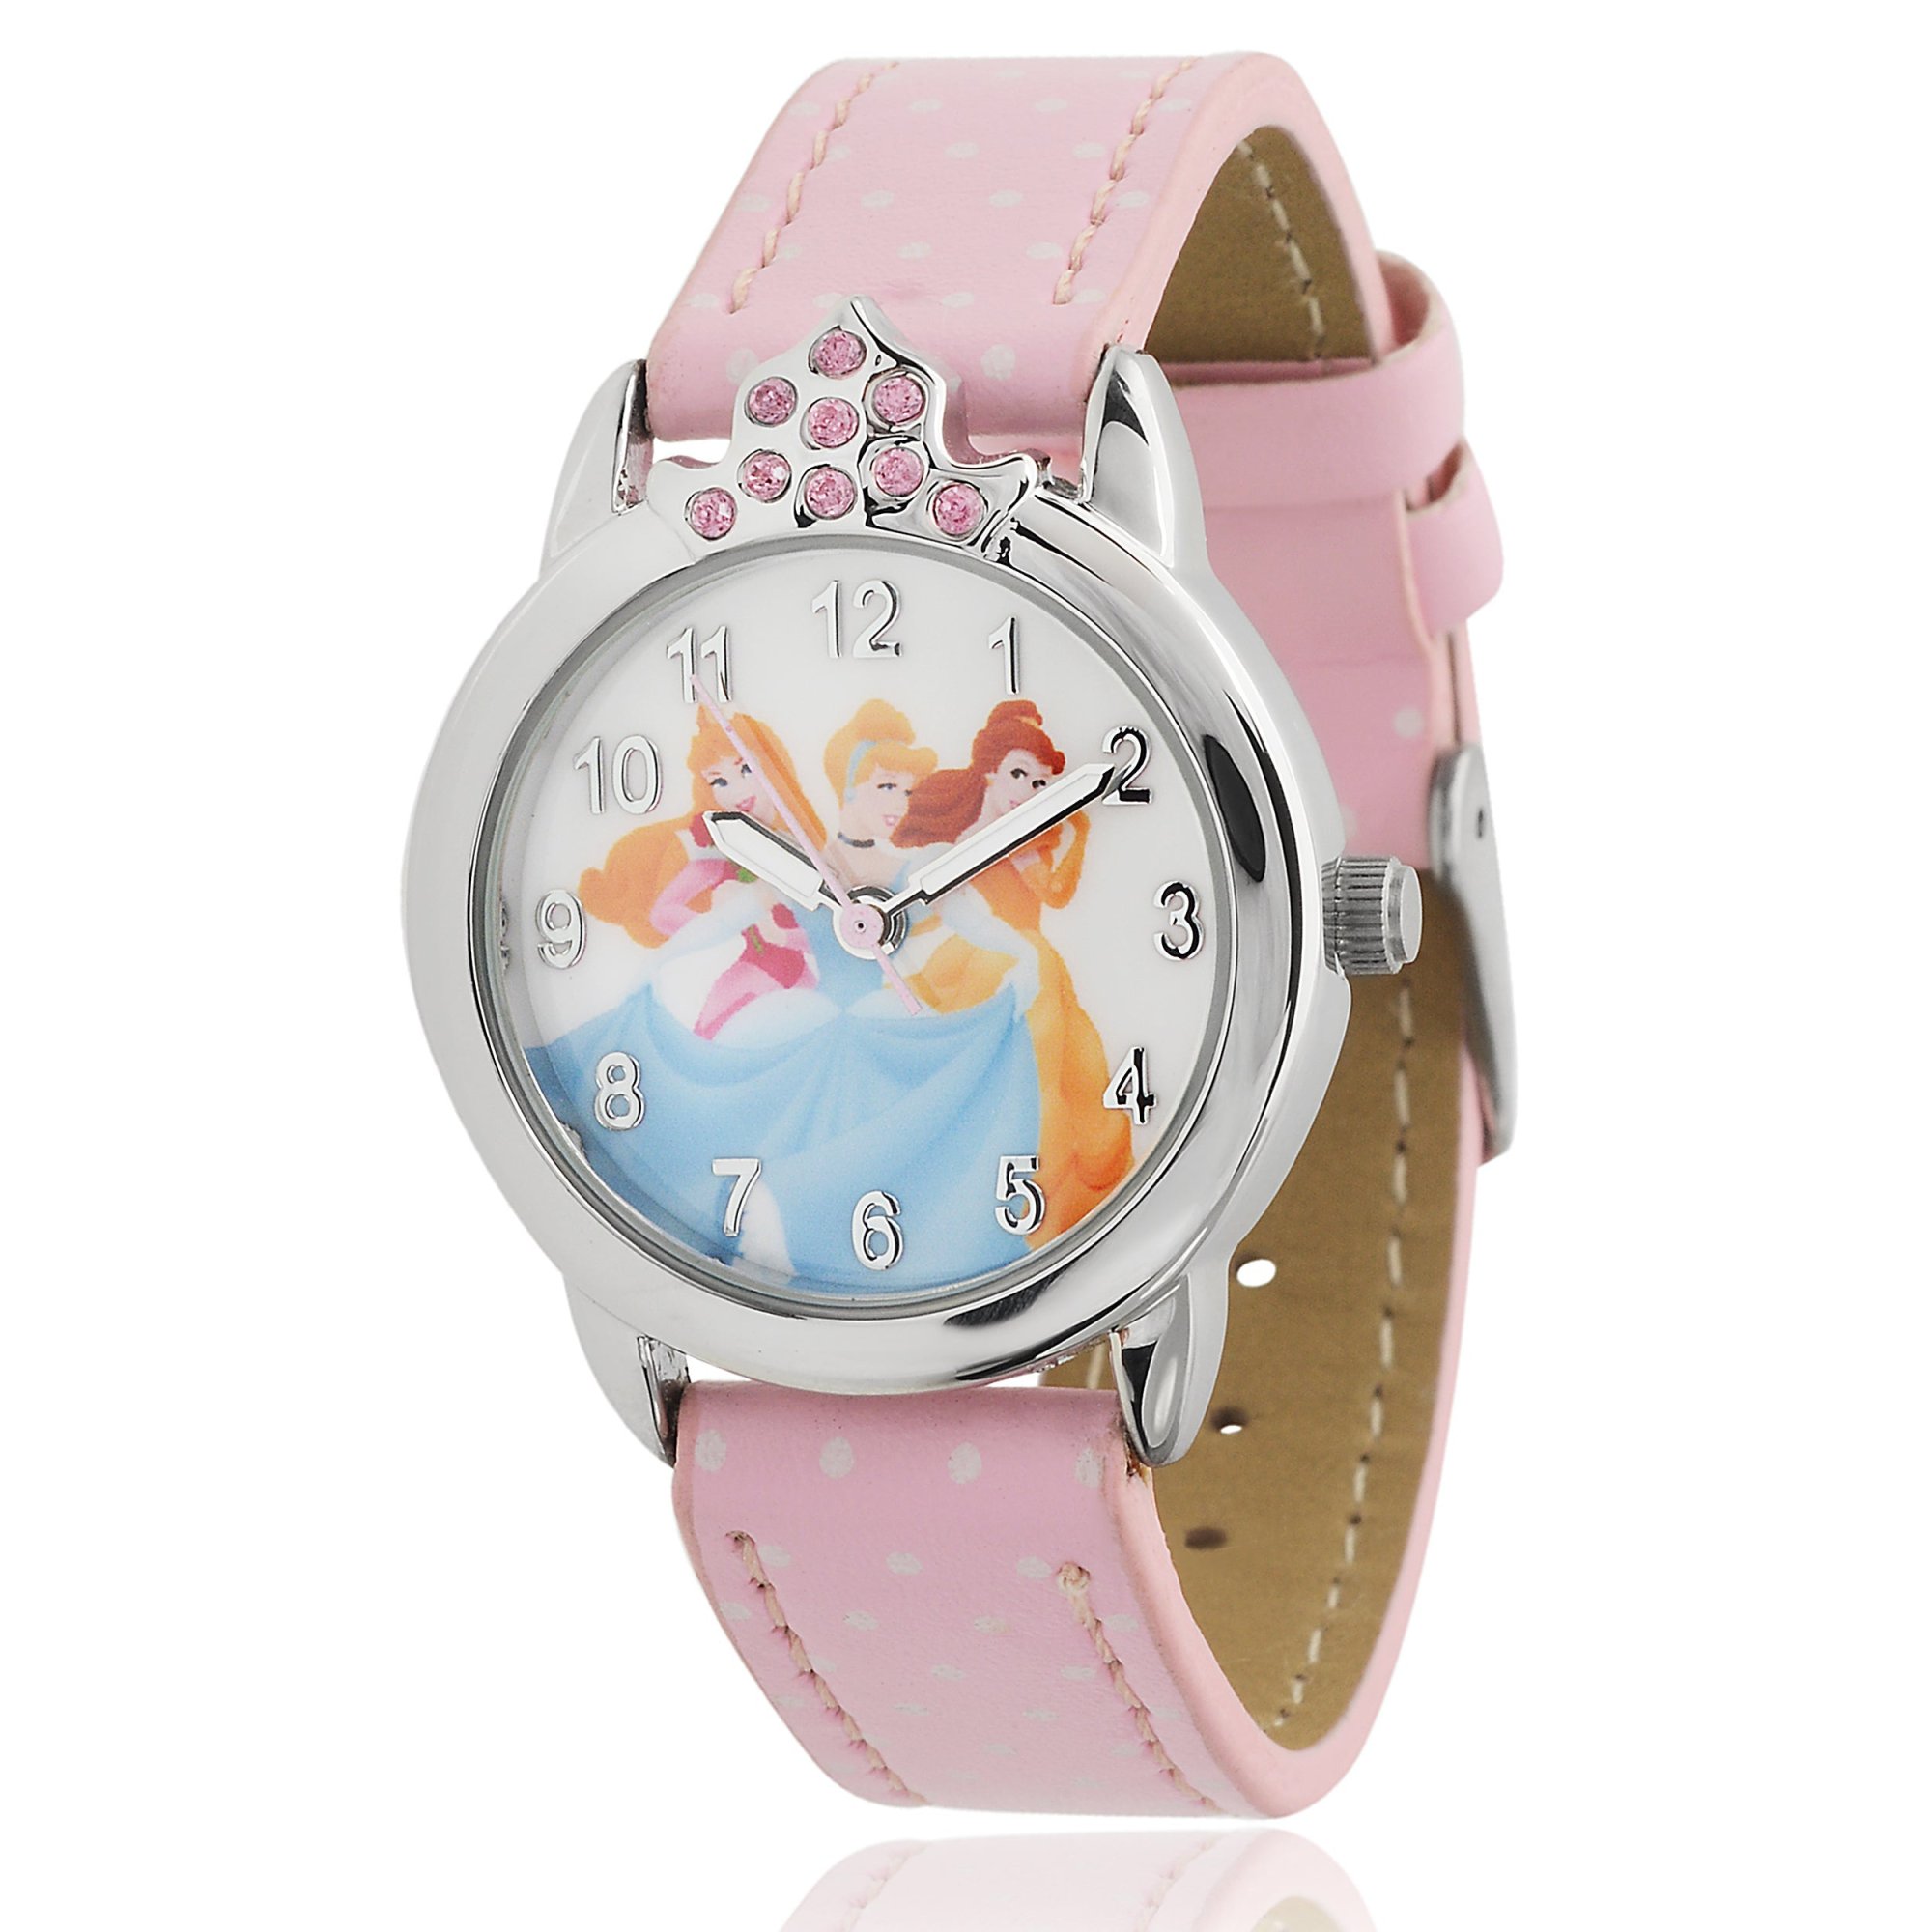 Model: Disney Princess Watch with Pink Leather Strap